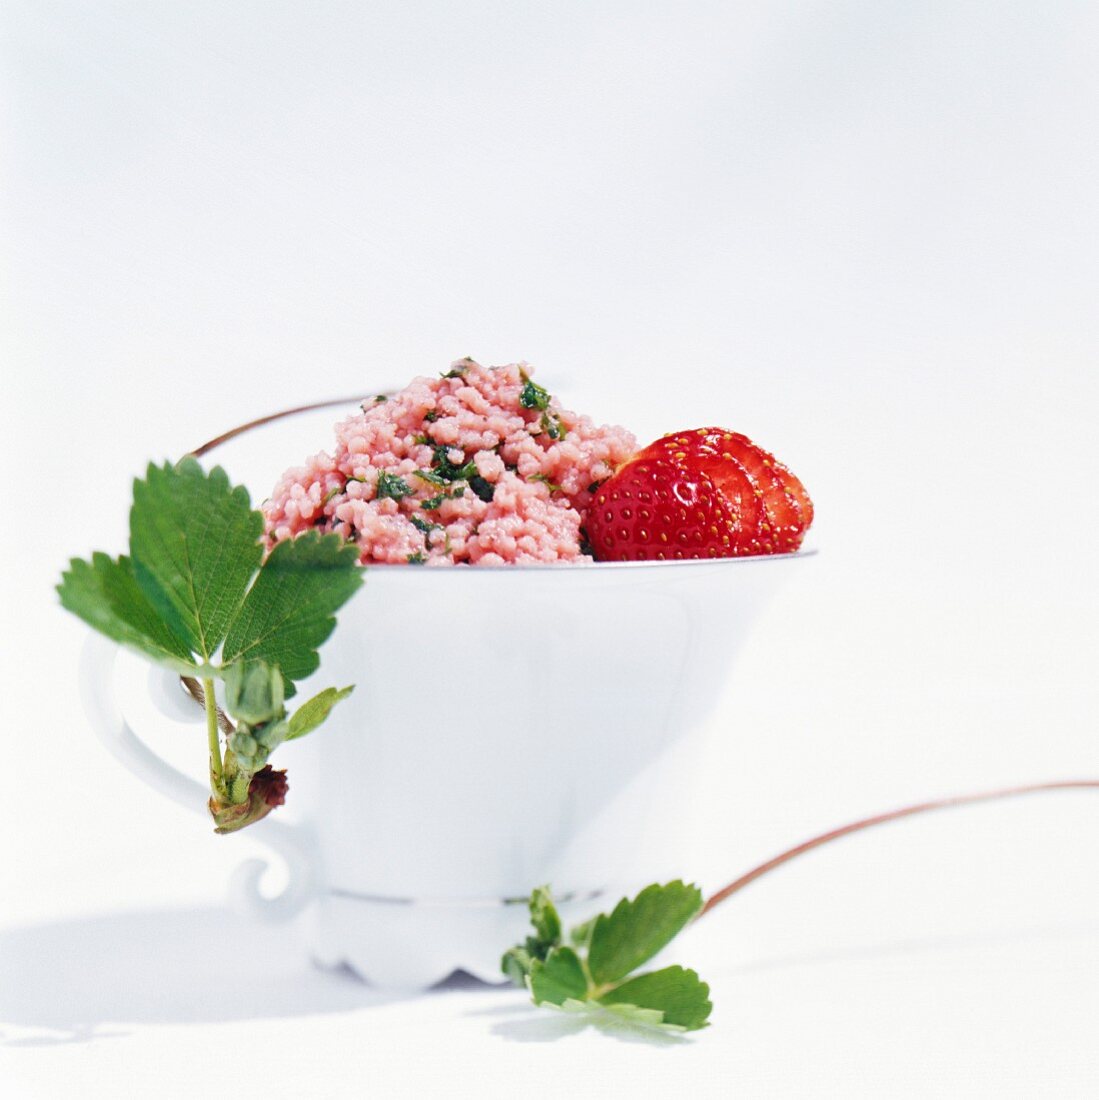 Tabbouleh with strawberries